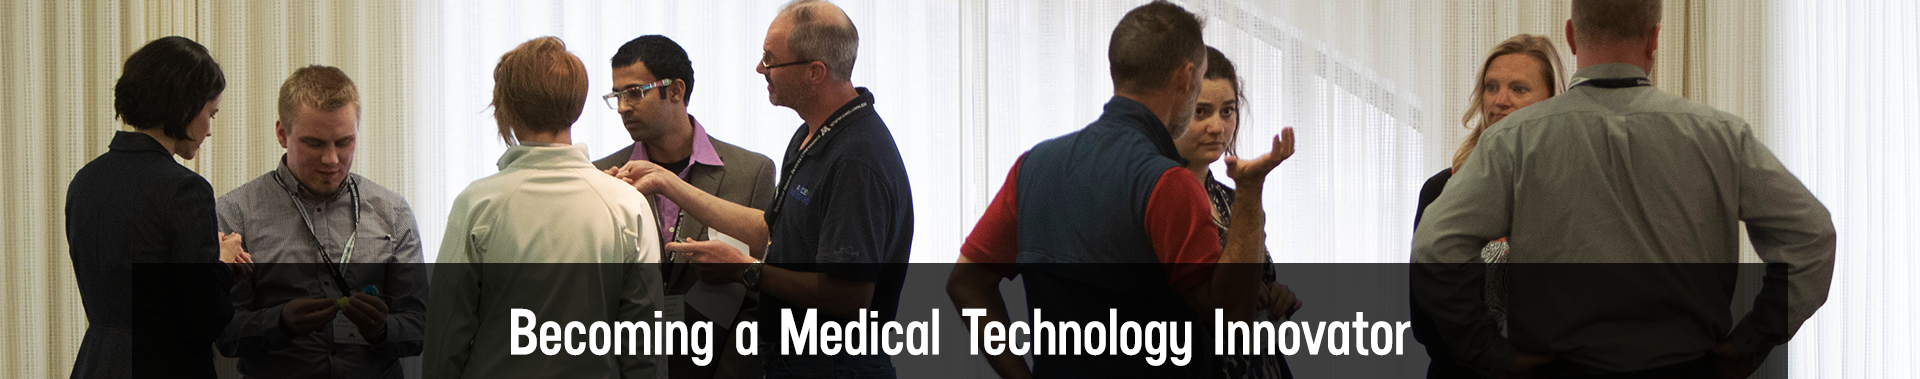 "Becoming a Medical Technology Innovator"